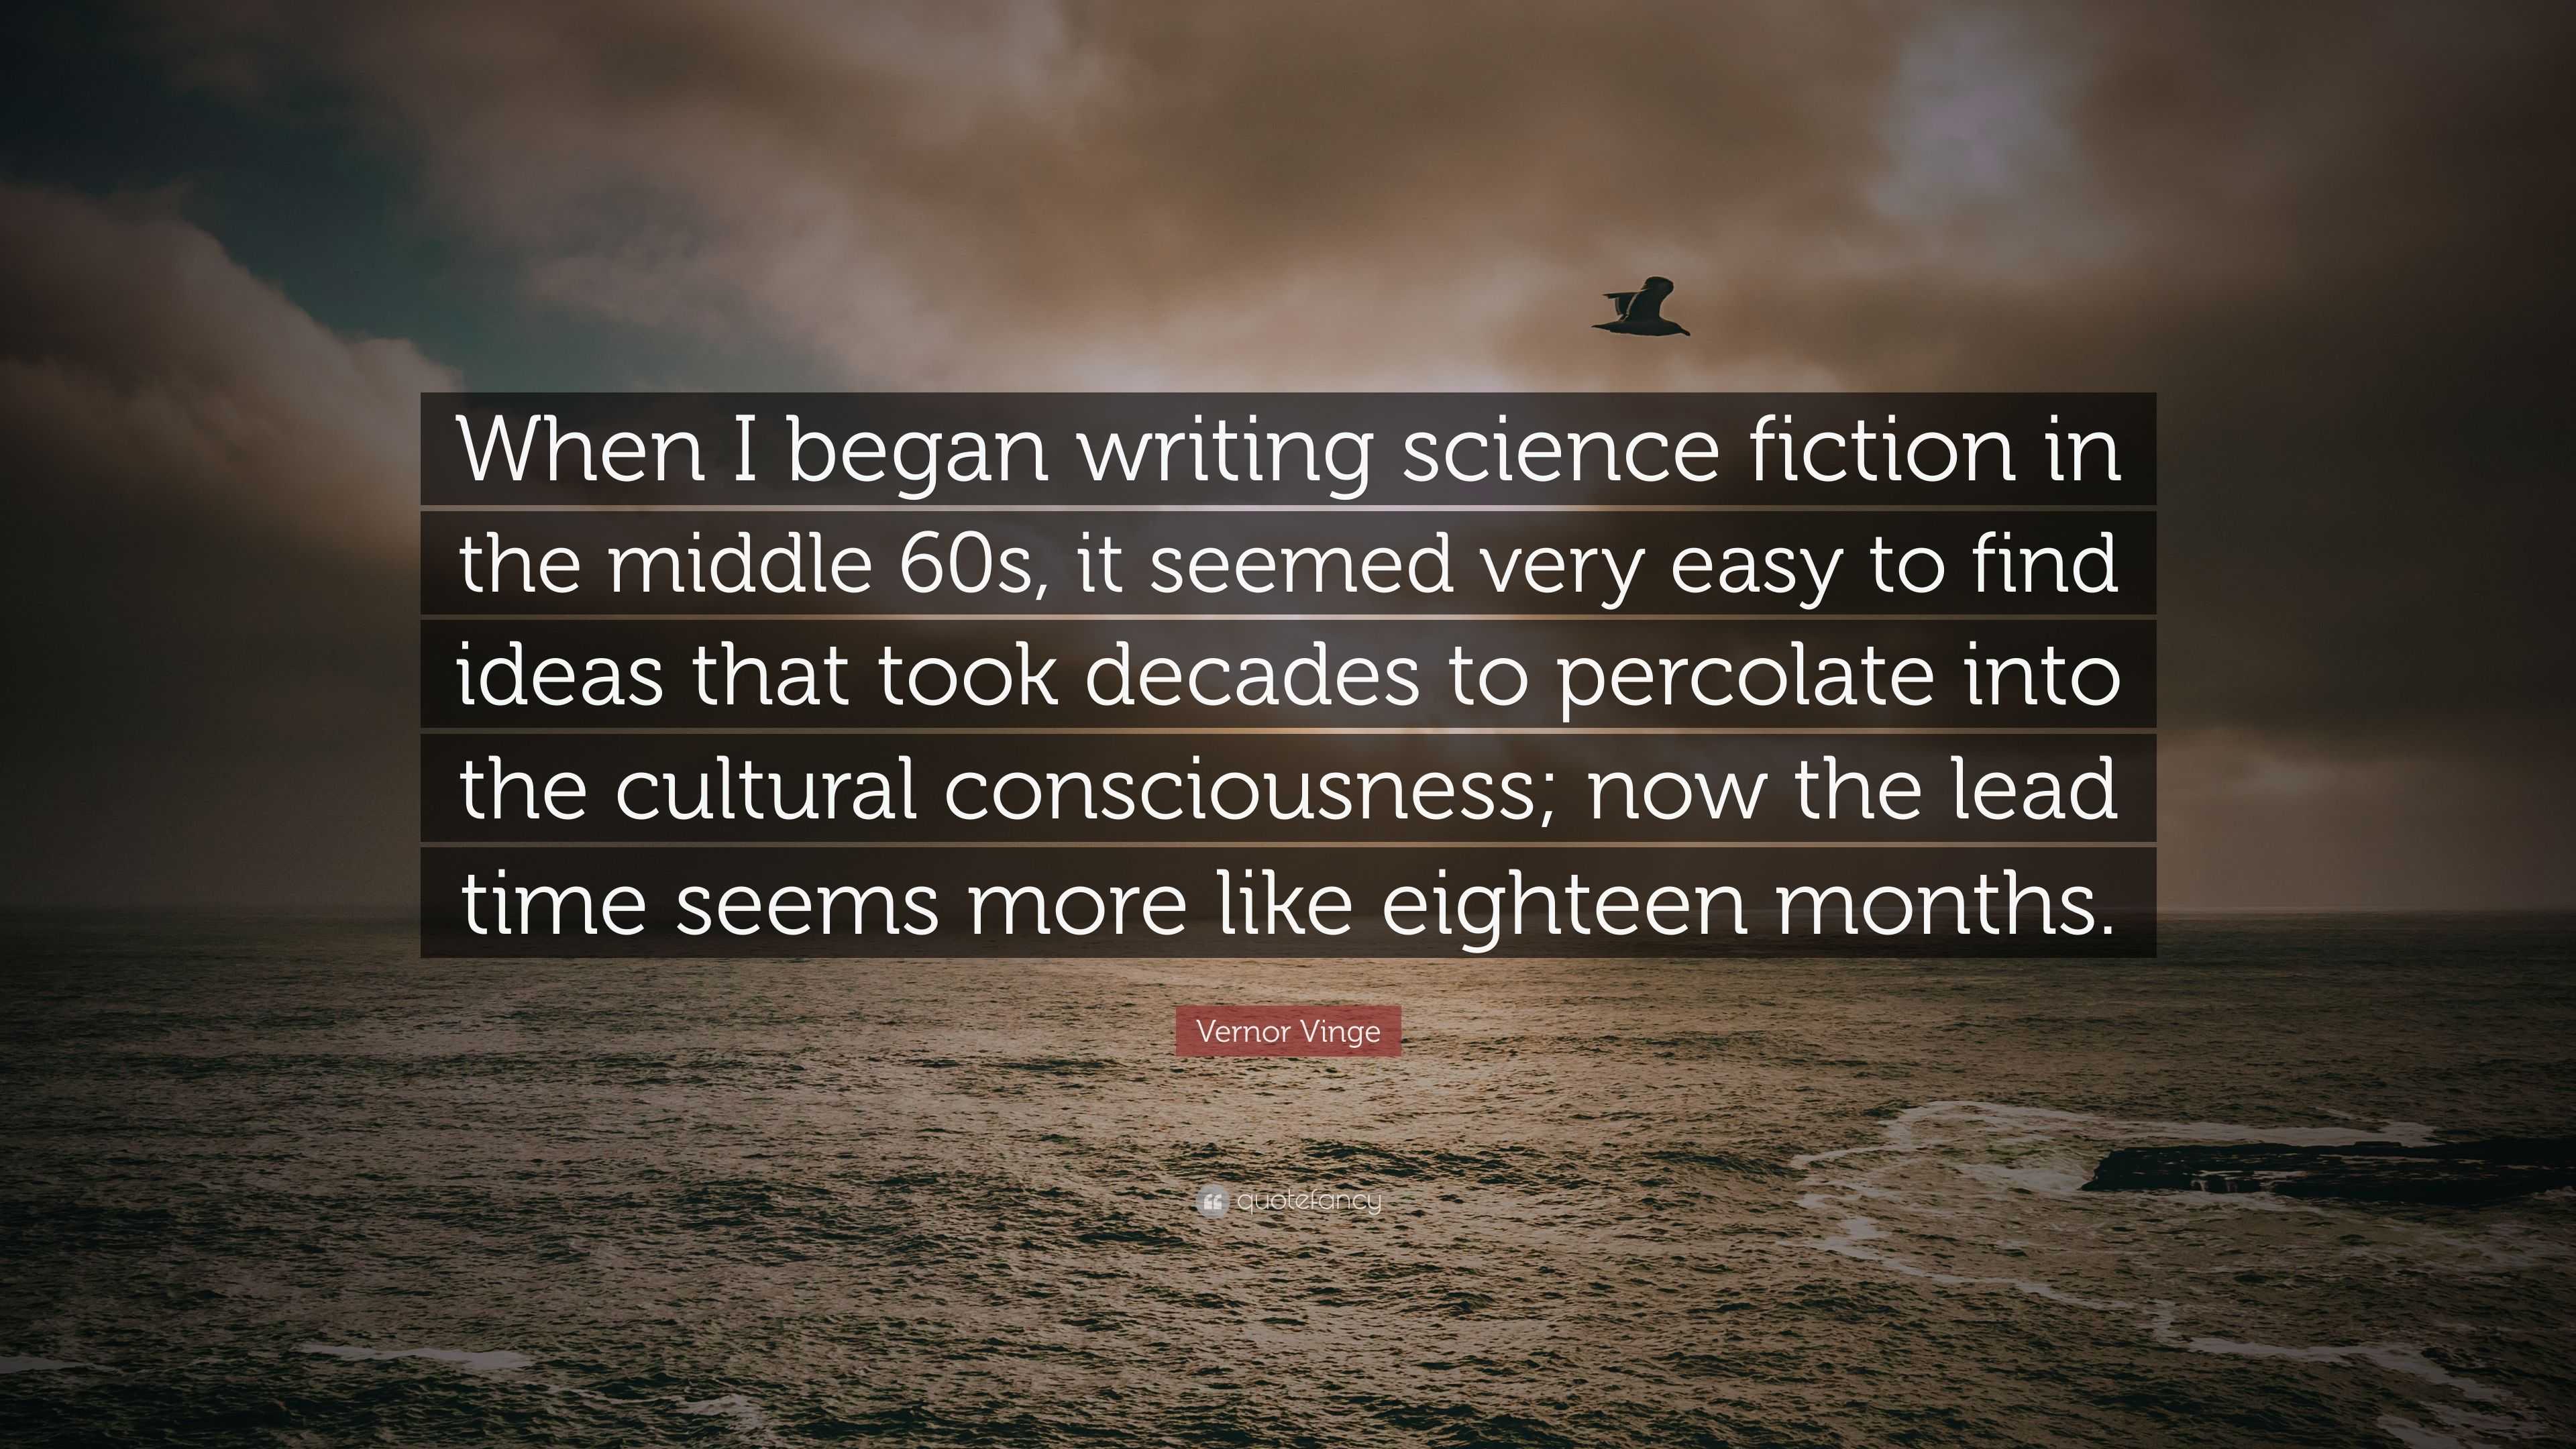 https://quotefancy.com/media/wallpaper/3840x2160/3133388-Vernor-Vinge-Quote-When-I-began-writing-science-fiction-in-the.jpg